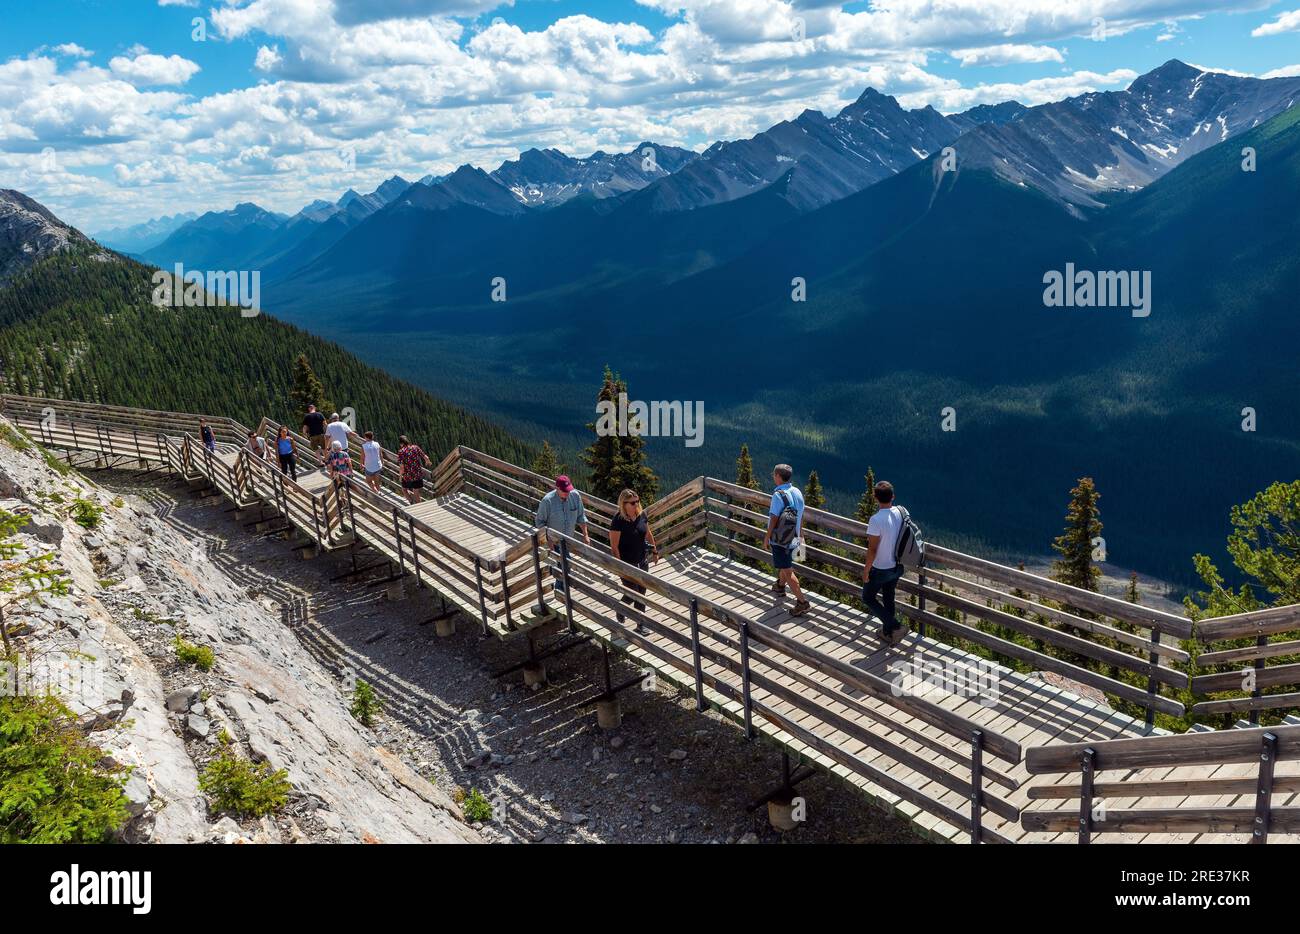 Tourists walking the Sulphur Mountain hike on elevated walkway after taking the Banff Gondola cable car, Banff national park, Canada. Stock Photo